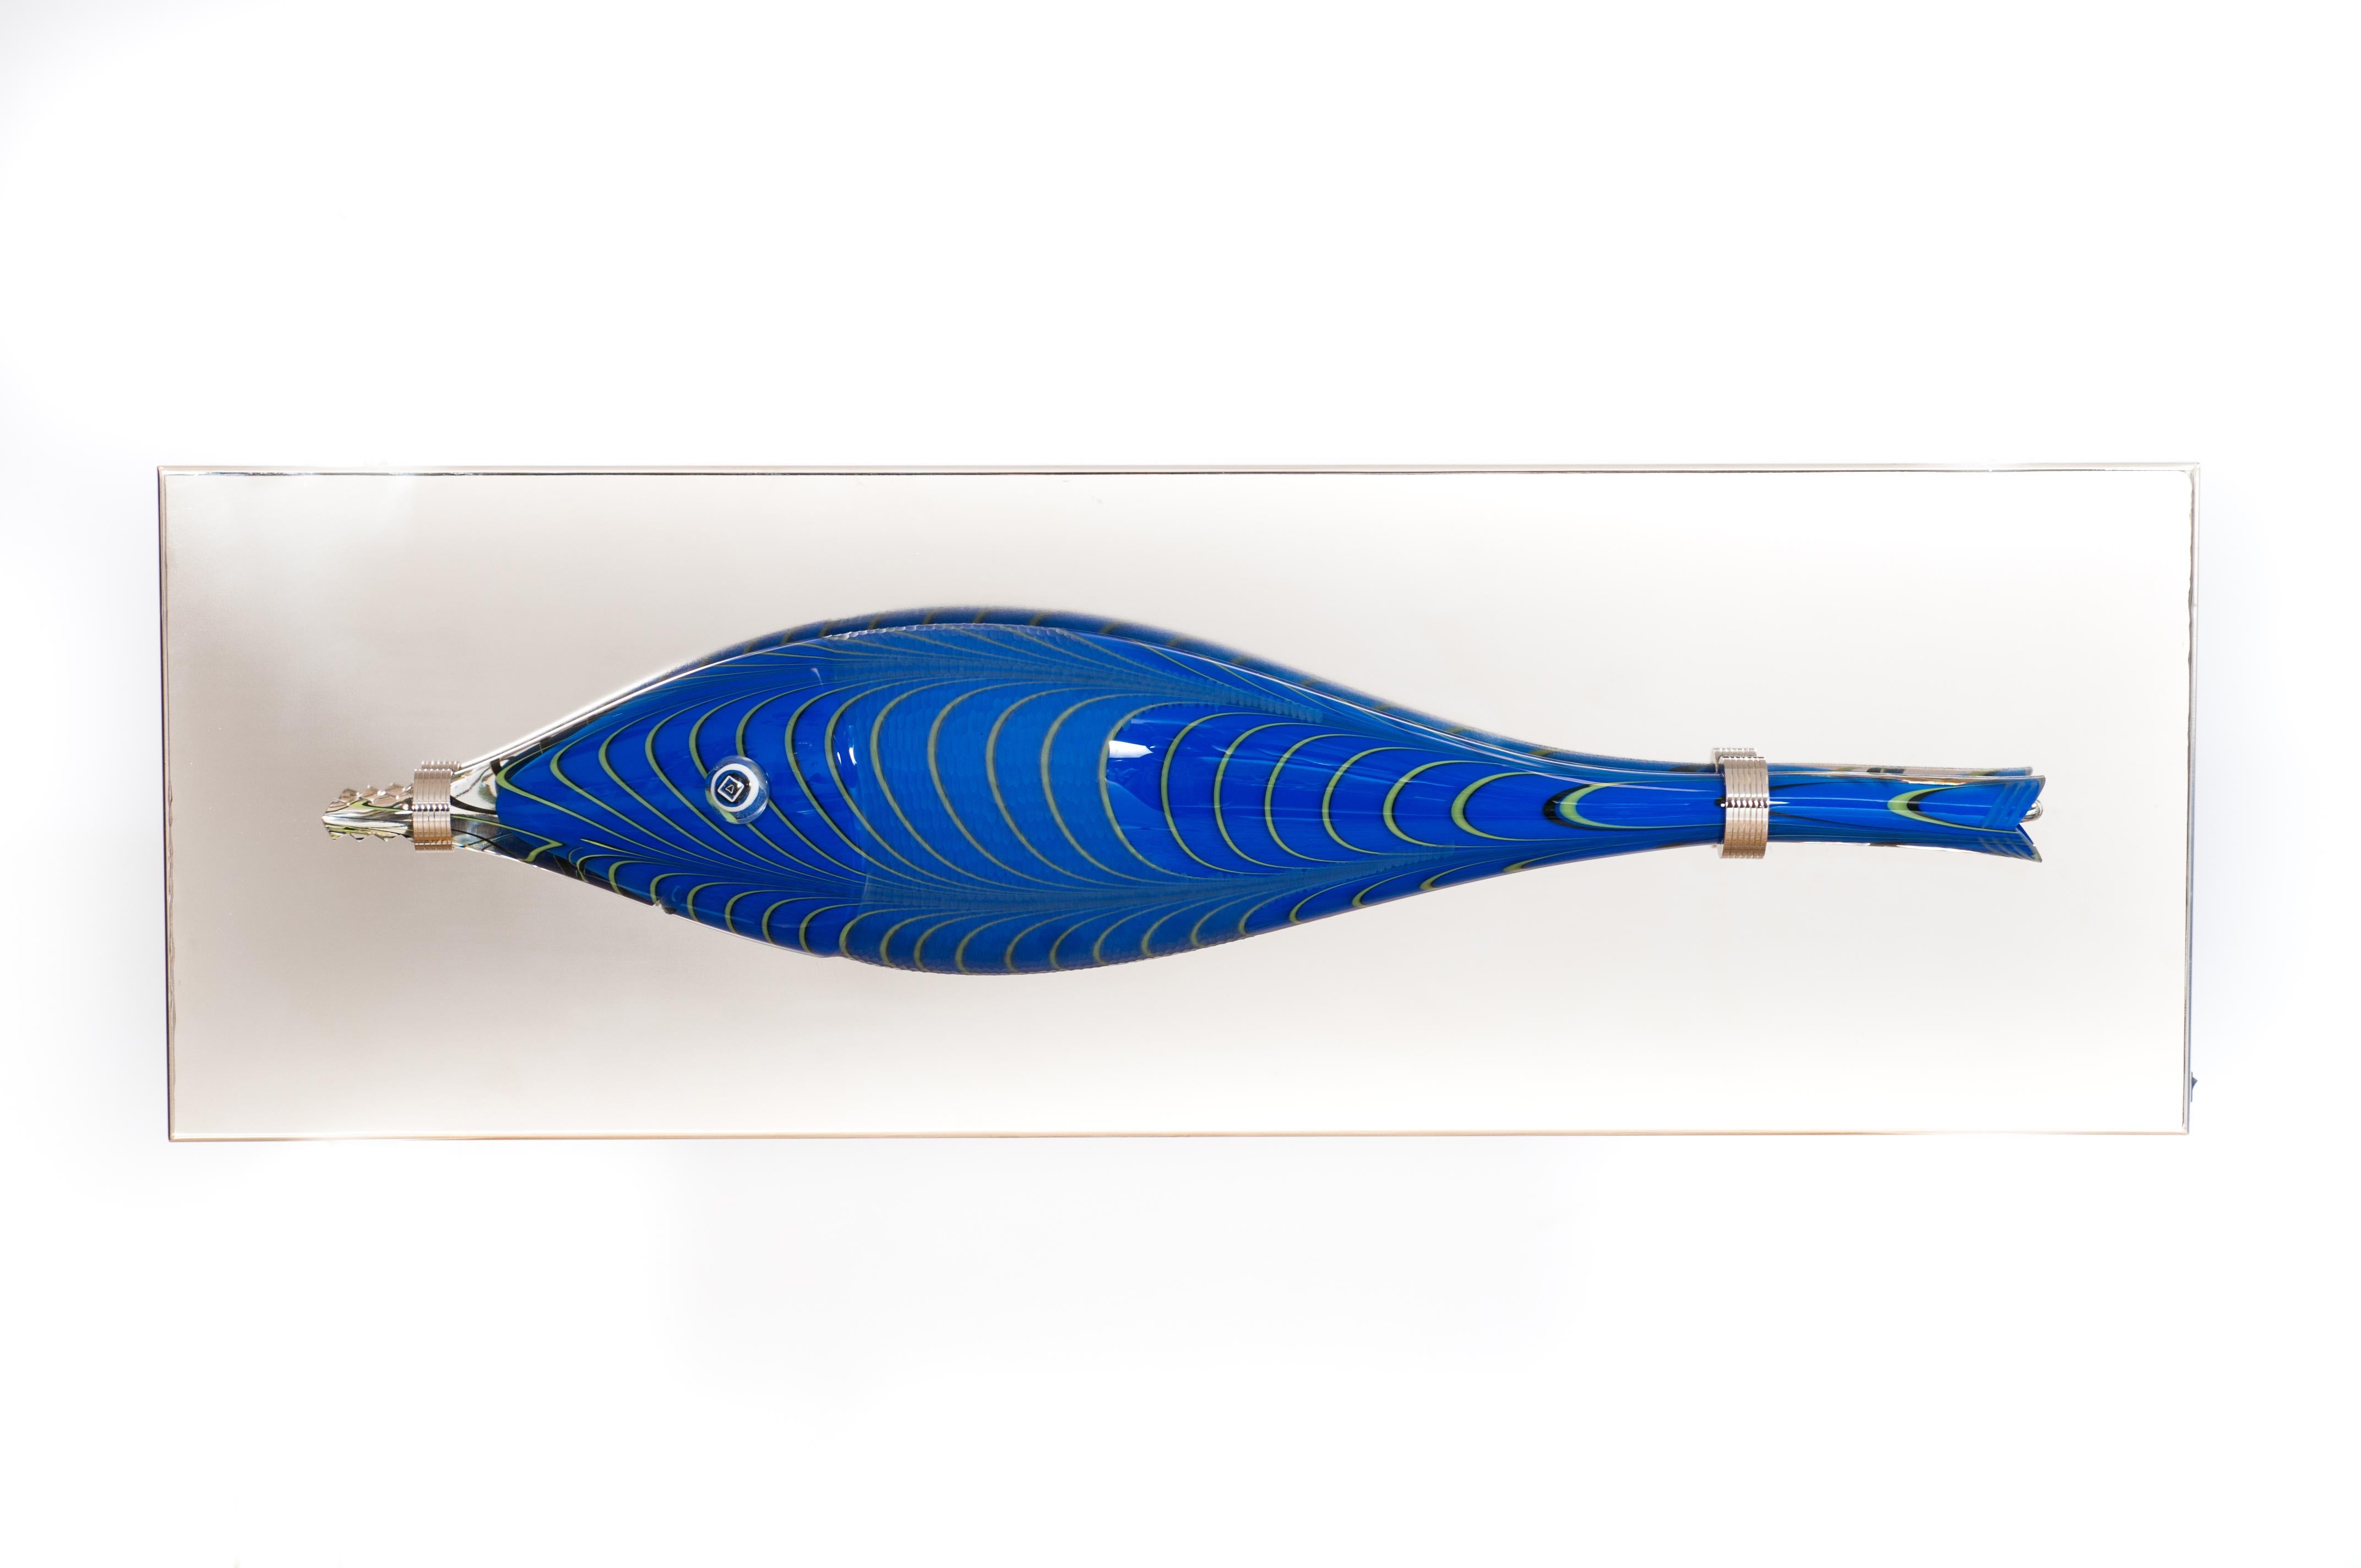 Elegant Italian Venetian blue wall lamp in Blue Murano glass 1990s Alberto Donà
This outstanding wall lamp was entirely handmade in blown Murano glass in the 1990s. The main body is one glass fish-shaped element with an intense blue color,